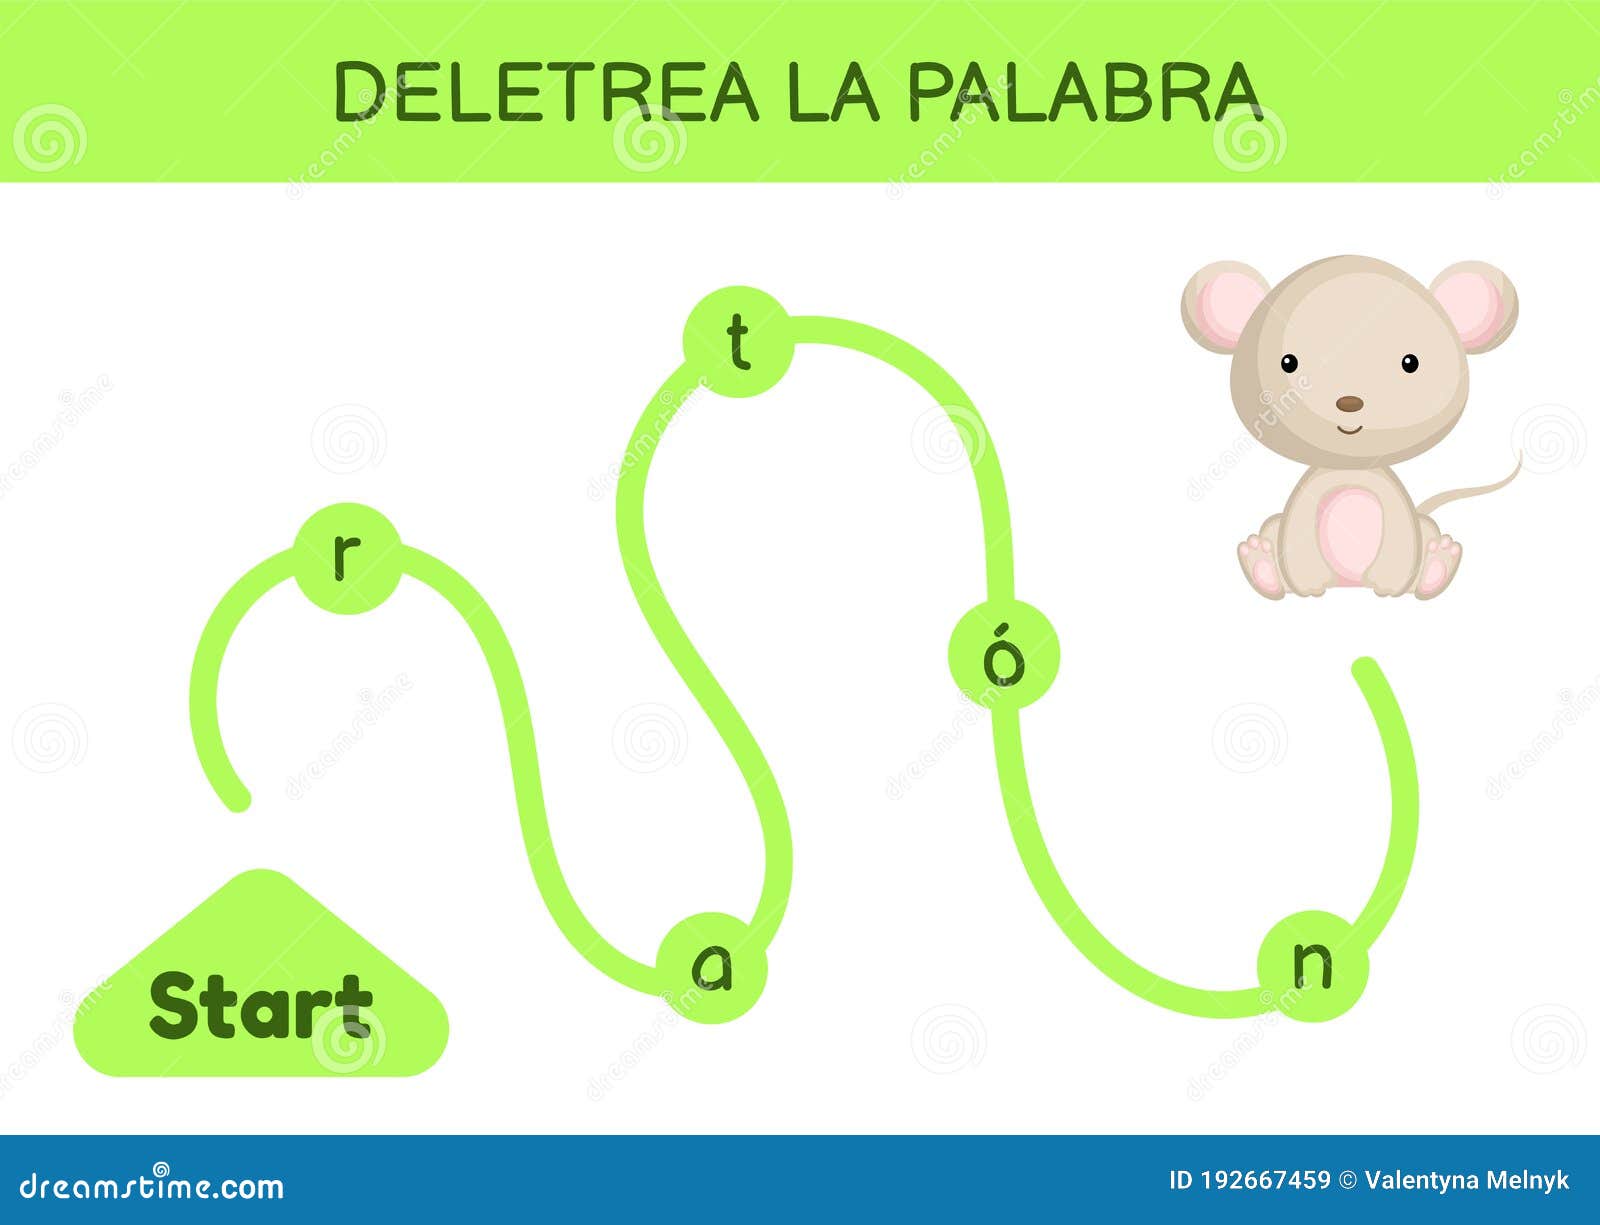 deletrea la palabra - spell the word. maze for kids. spelling word game template. learn to read word mouse. activity page for